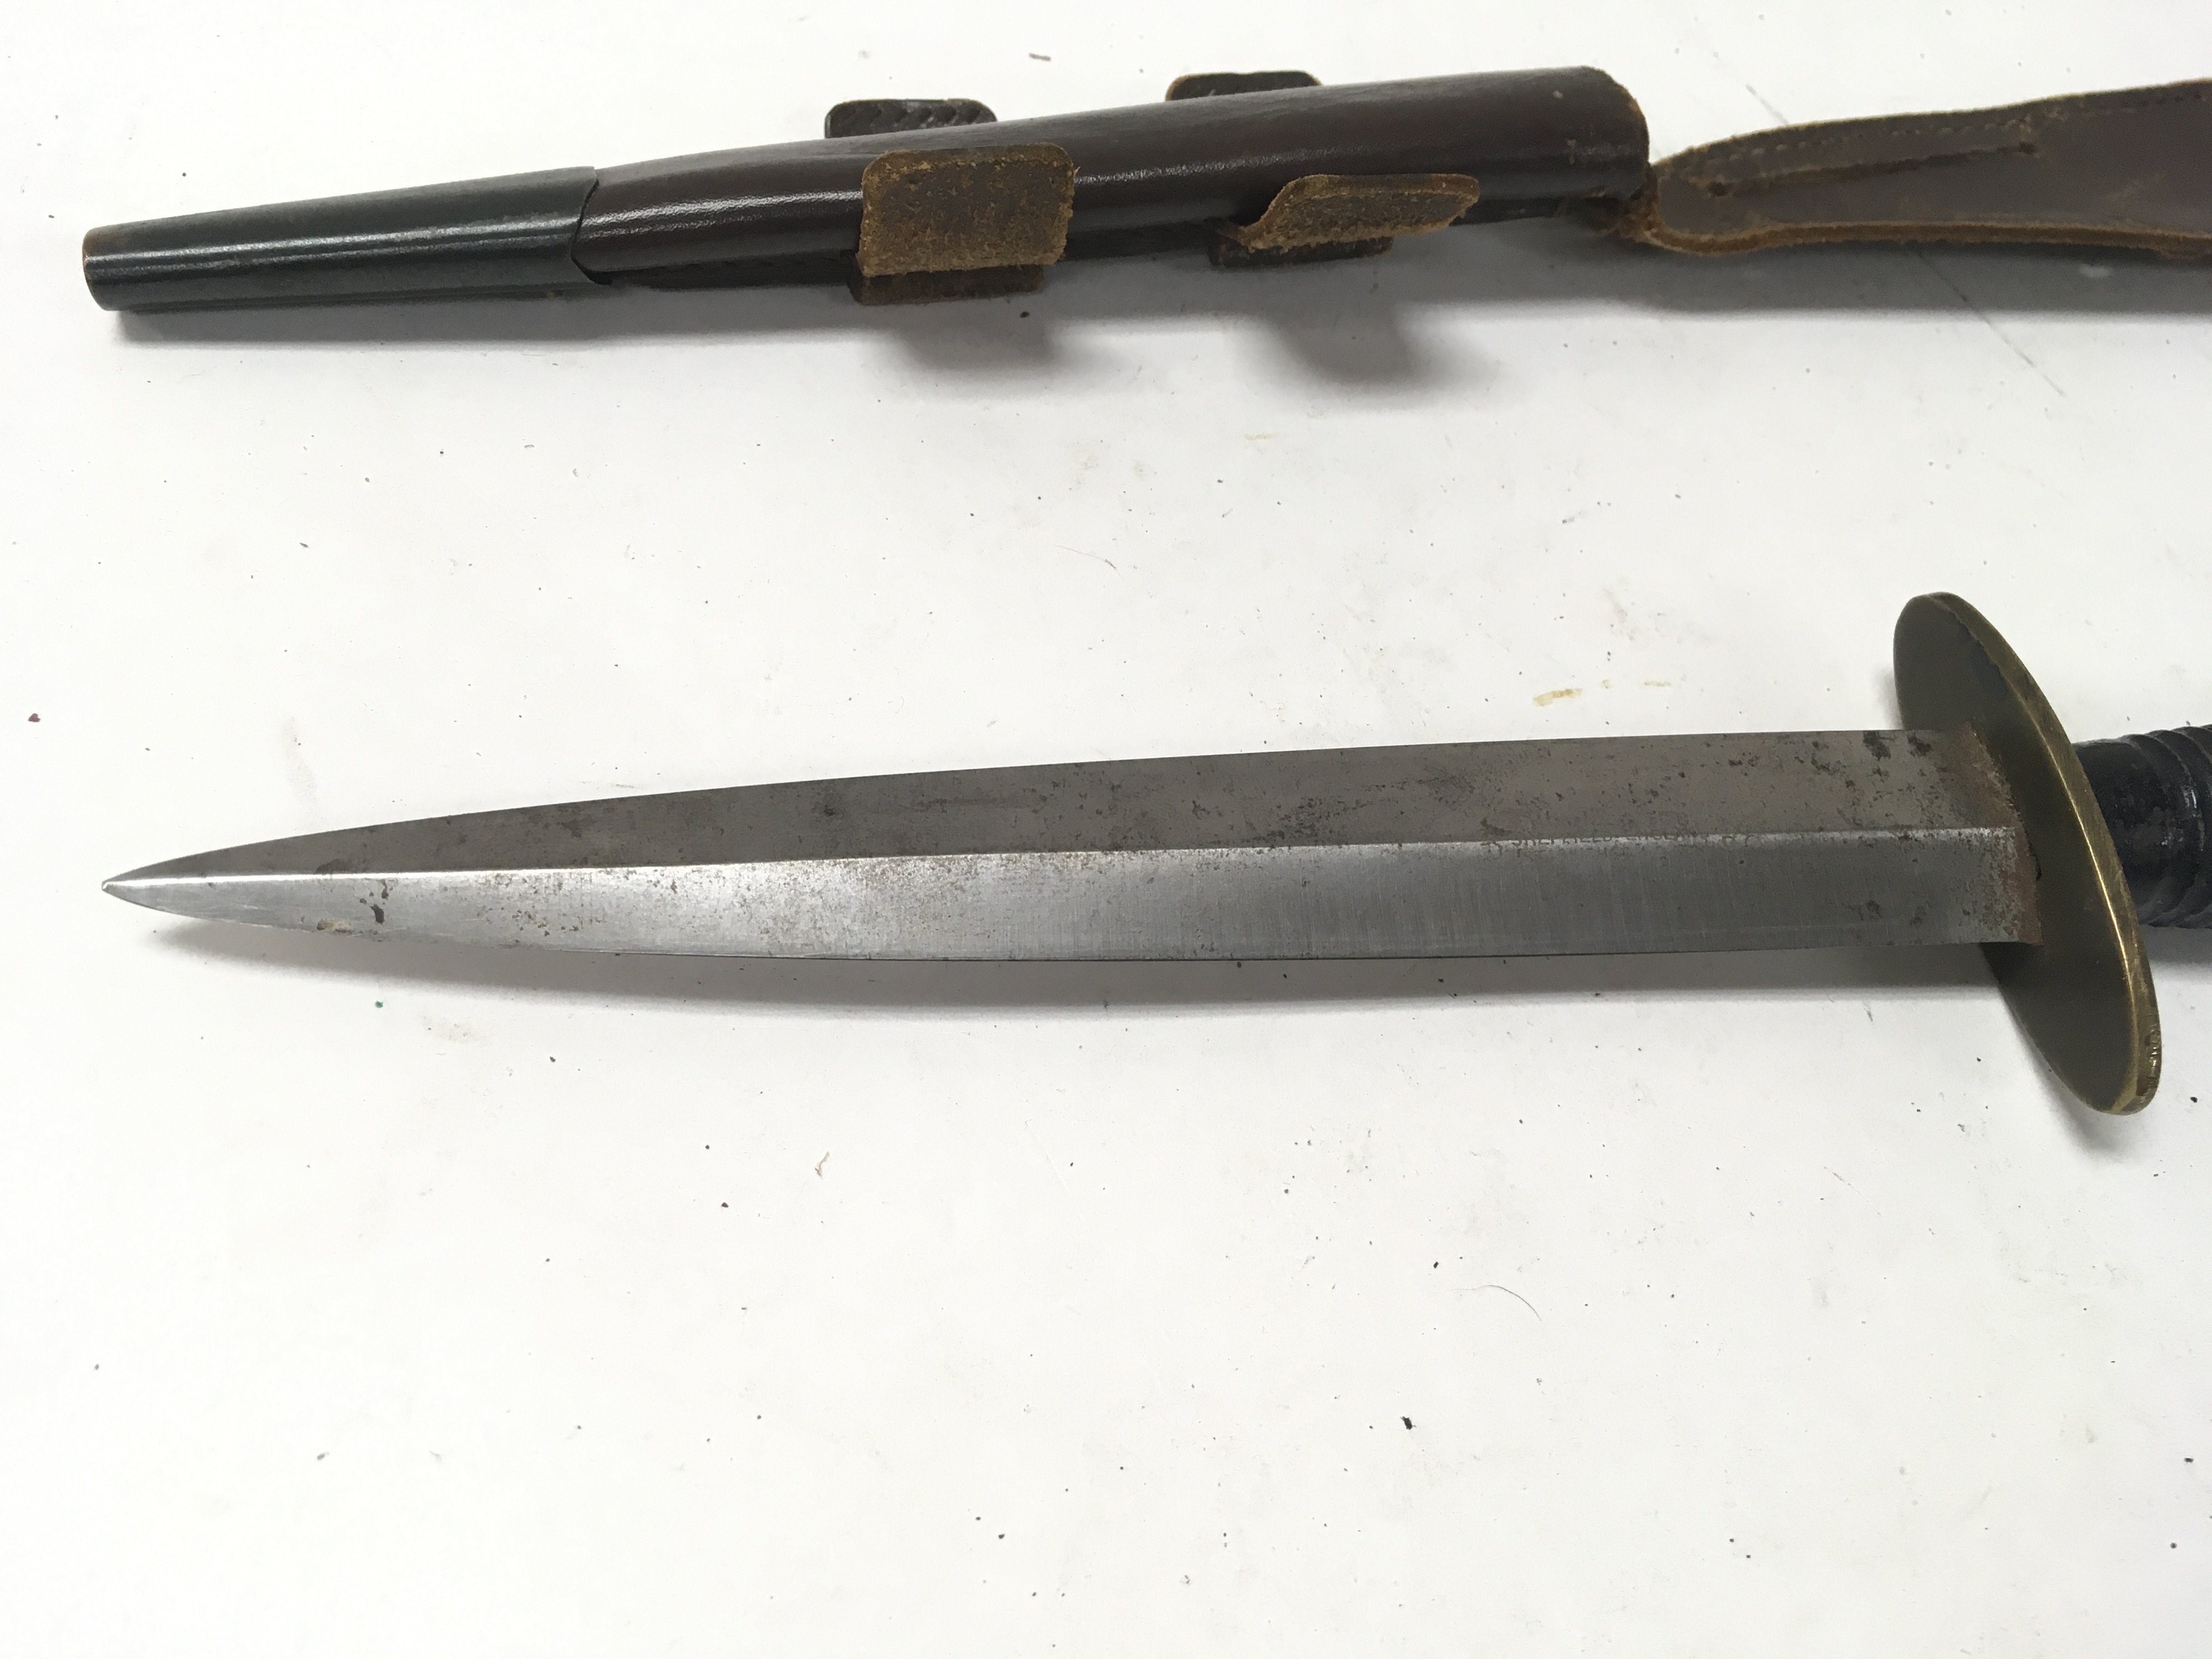 A Fairbairn Sykes fighting knife with leather scab - Image 3 of 5